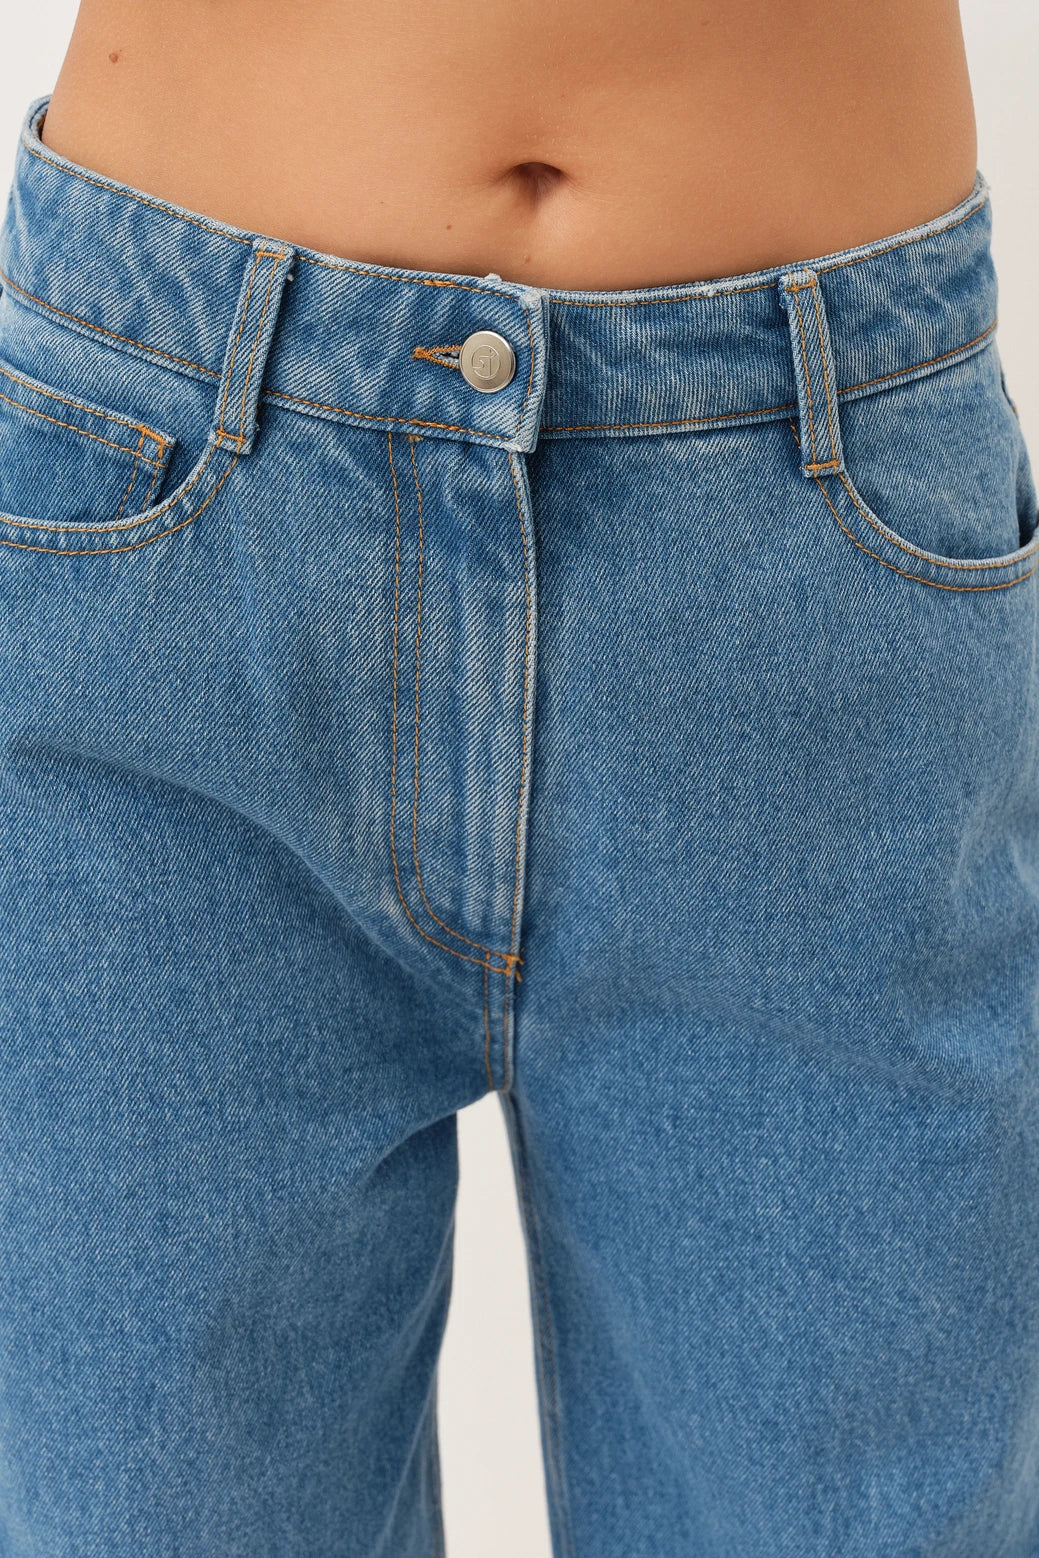 Helle Jeans